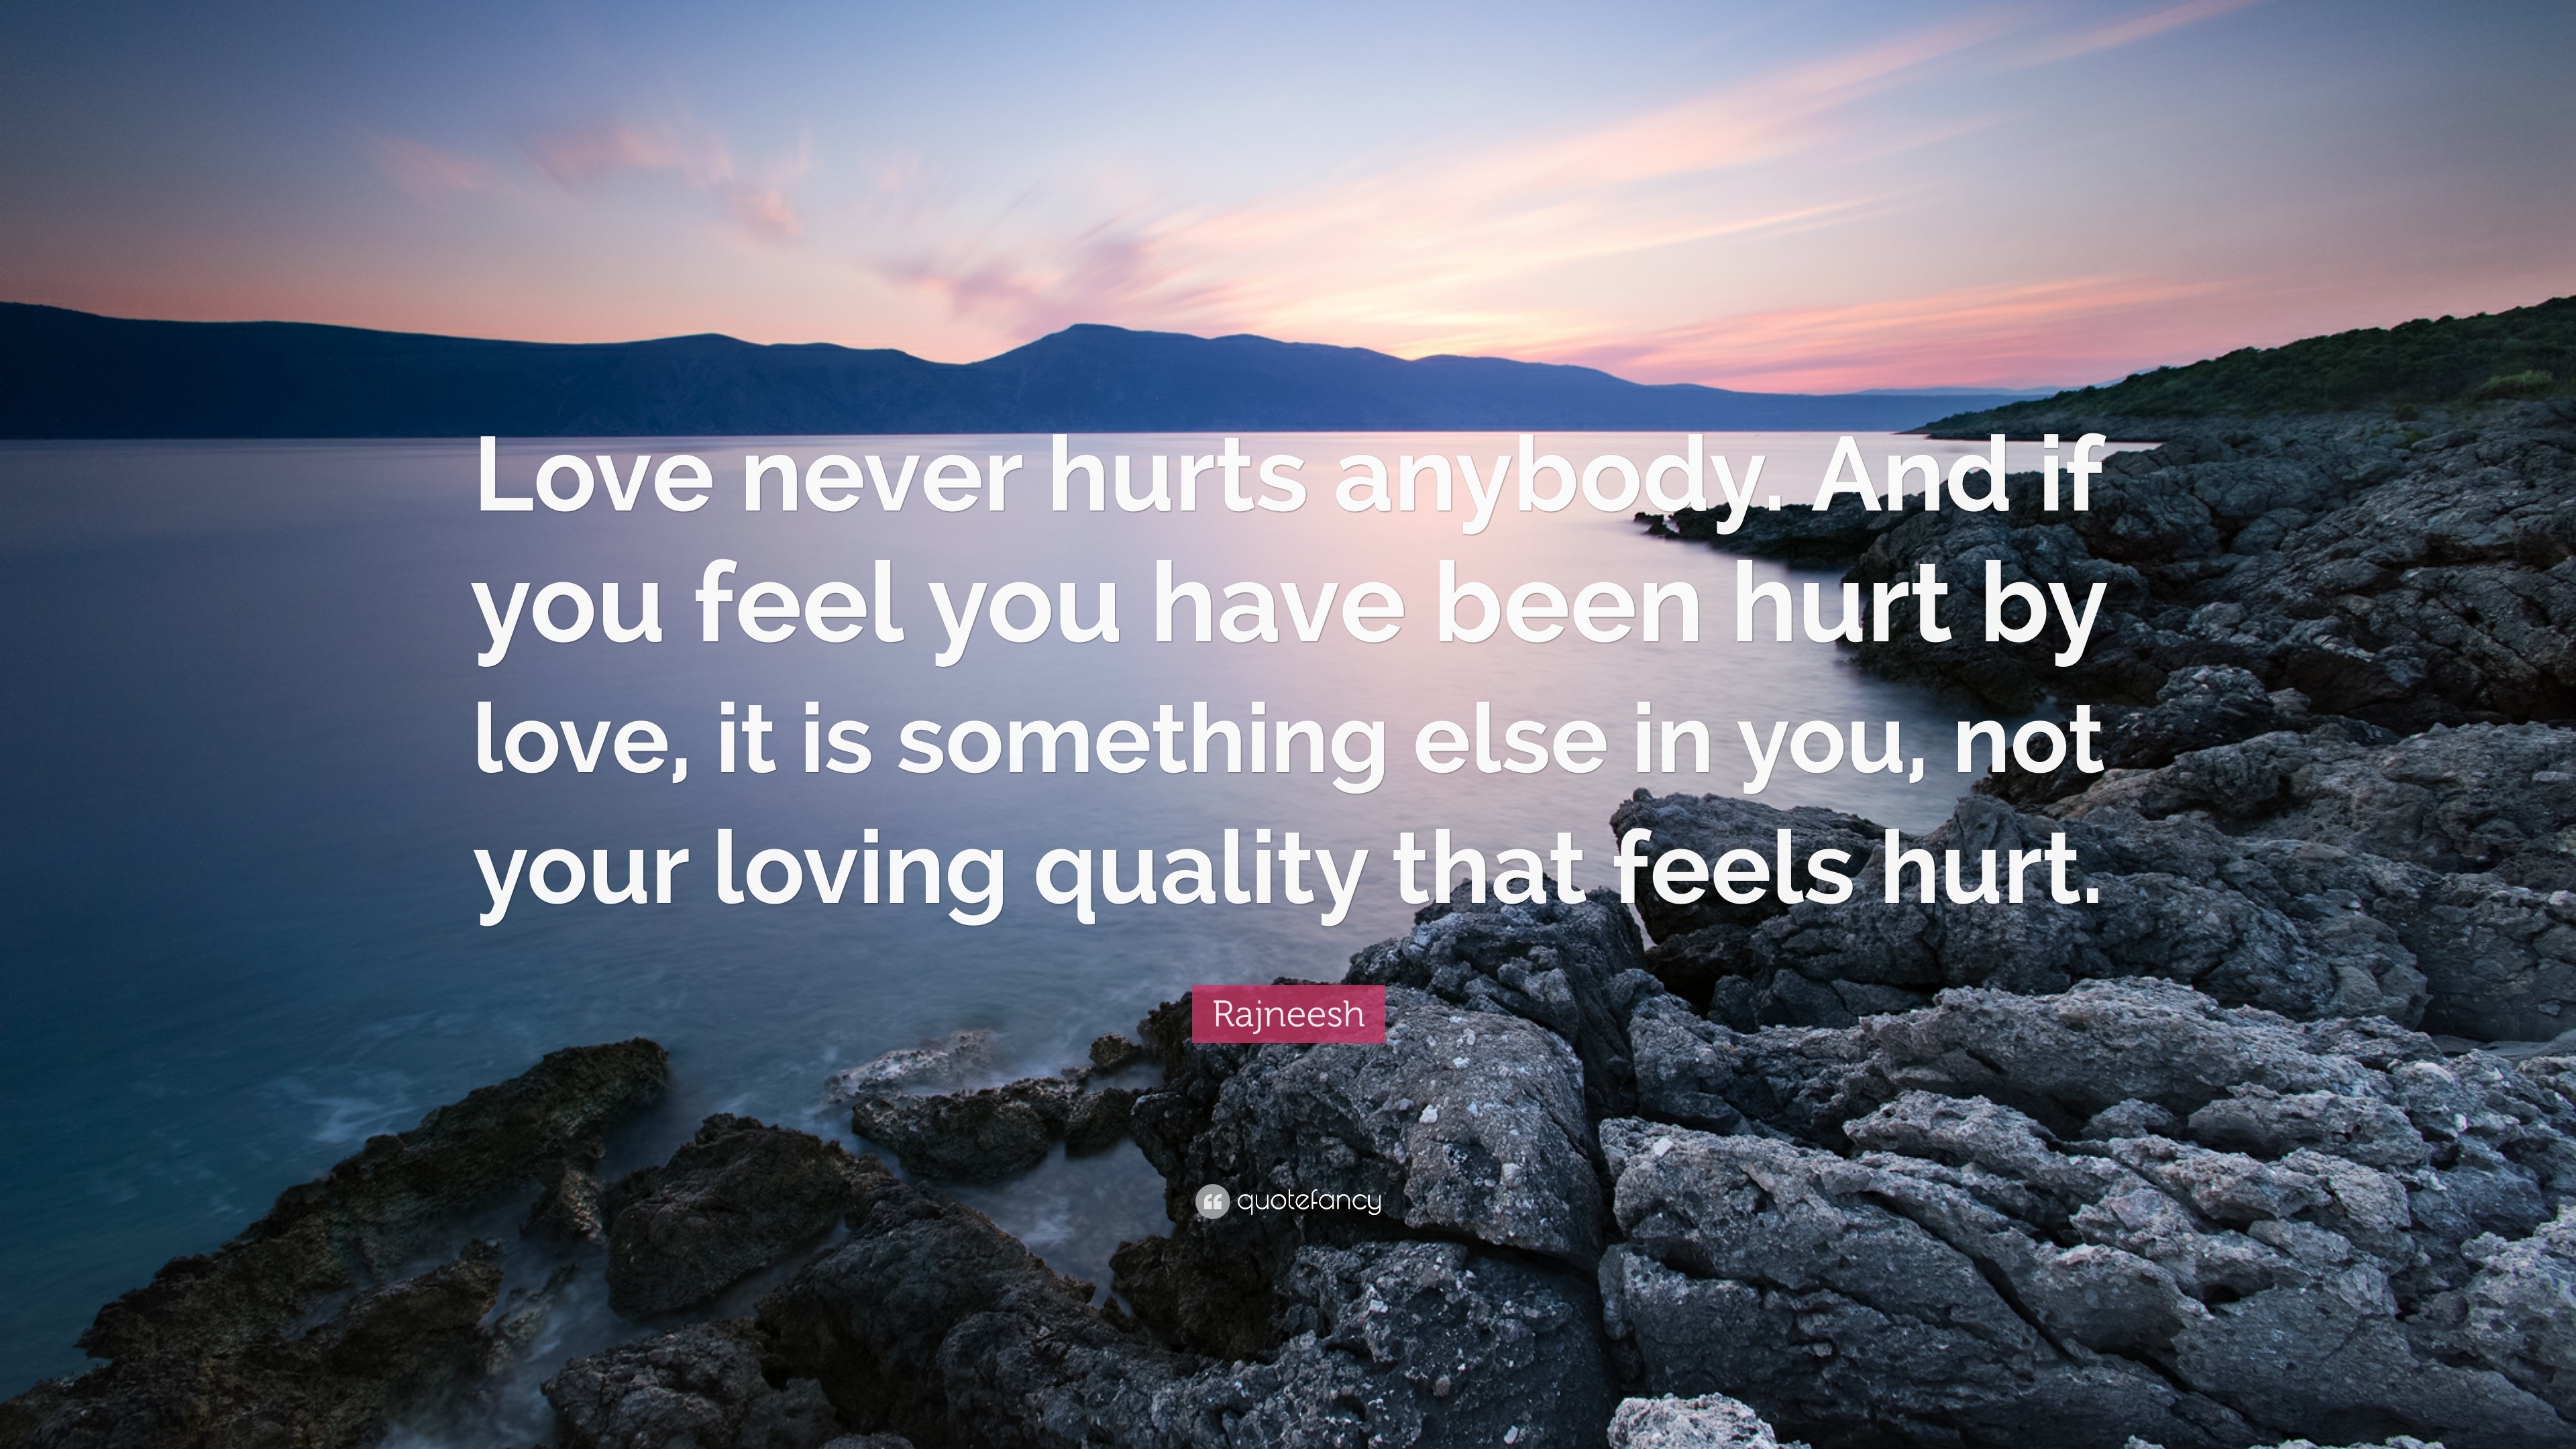 Rajneesh Quote “Love never hurts anybody And if you feel you have been